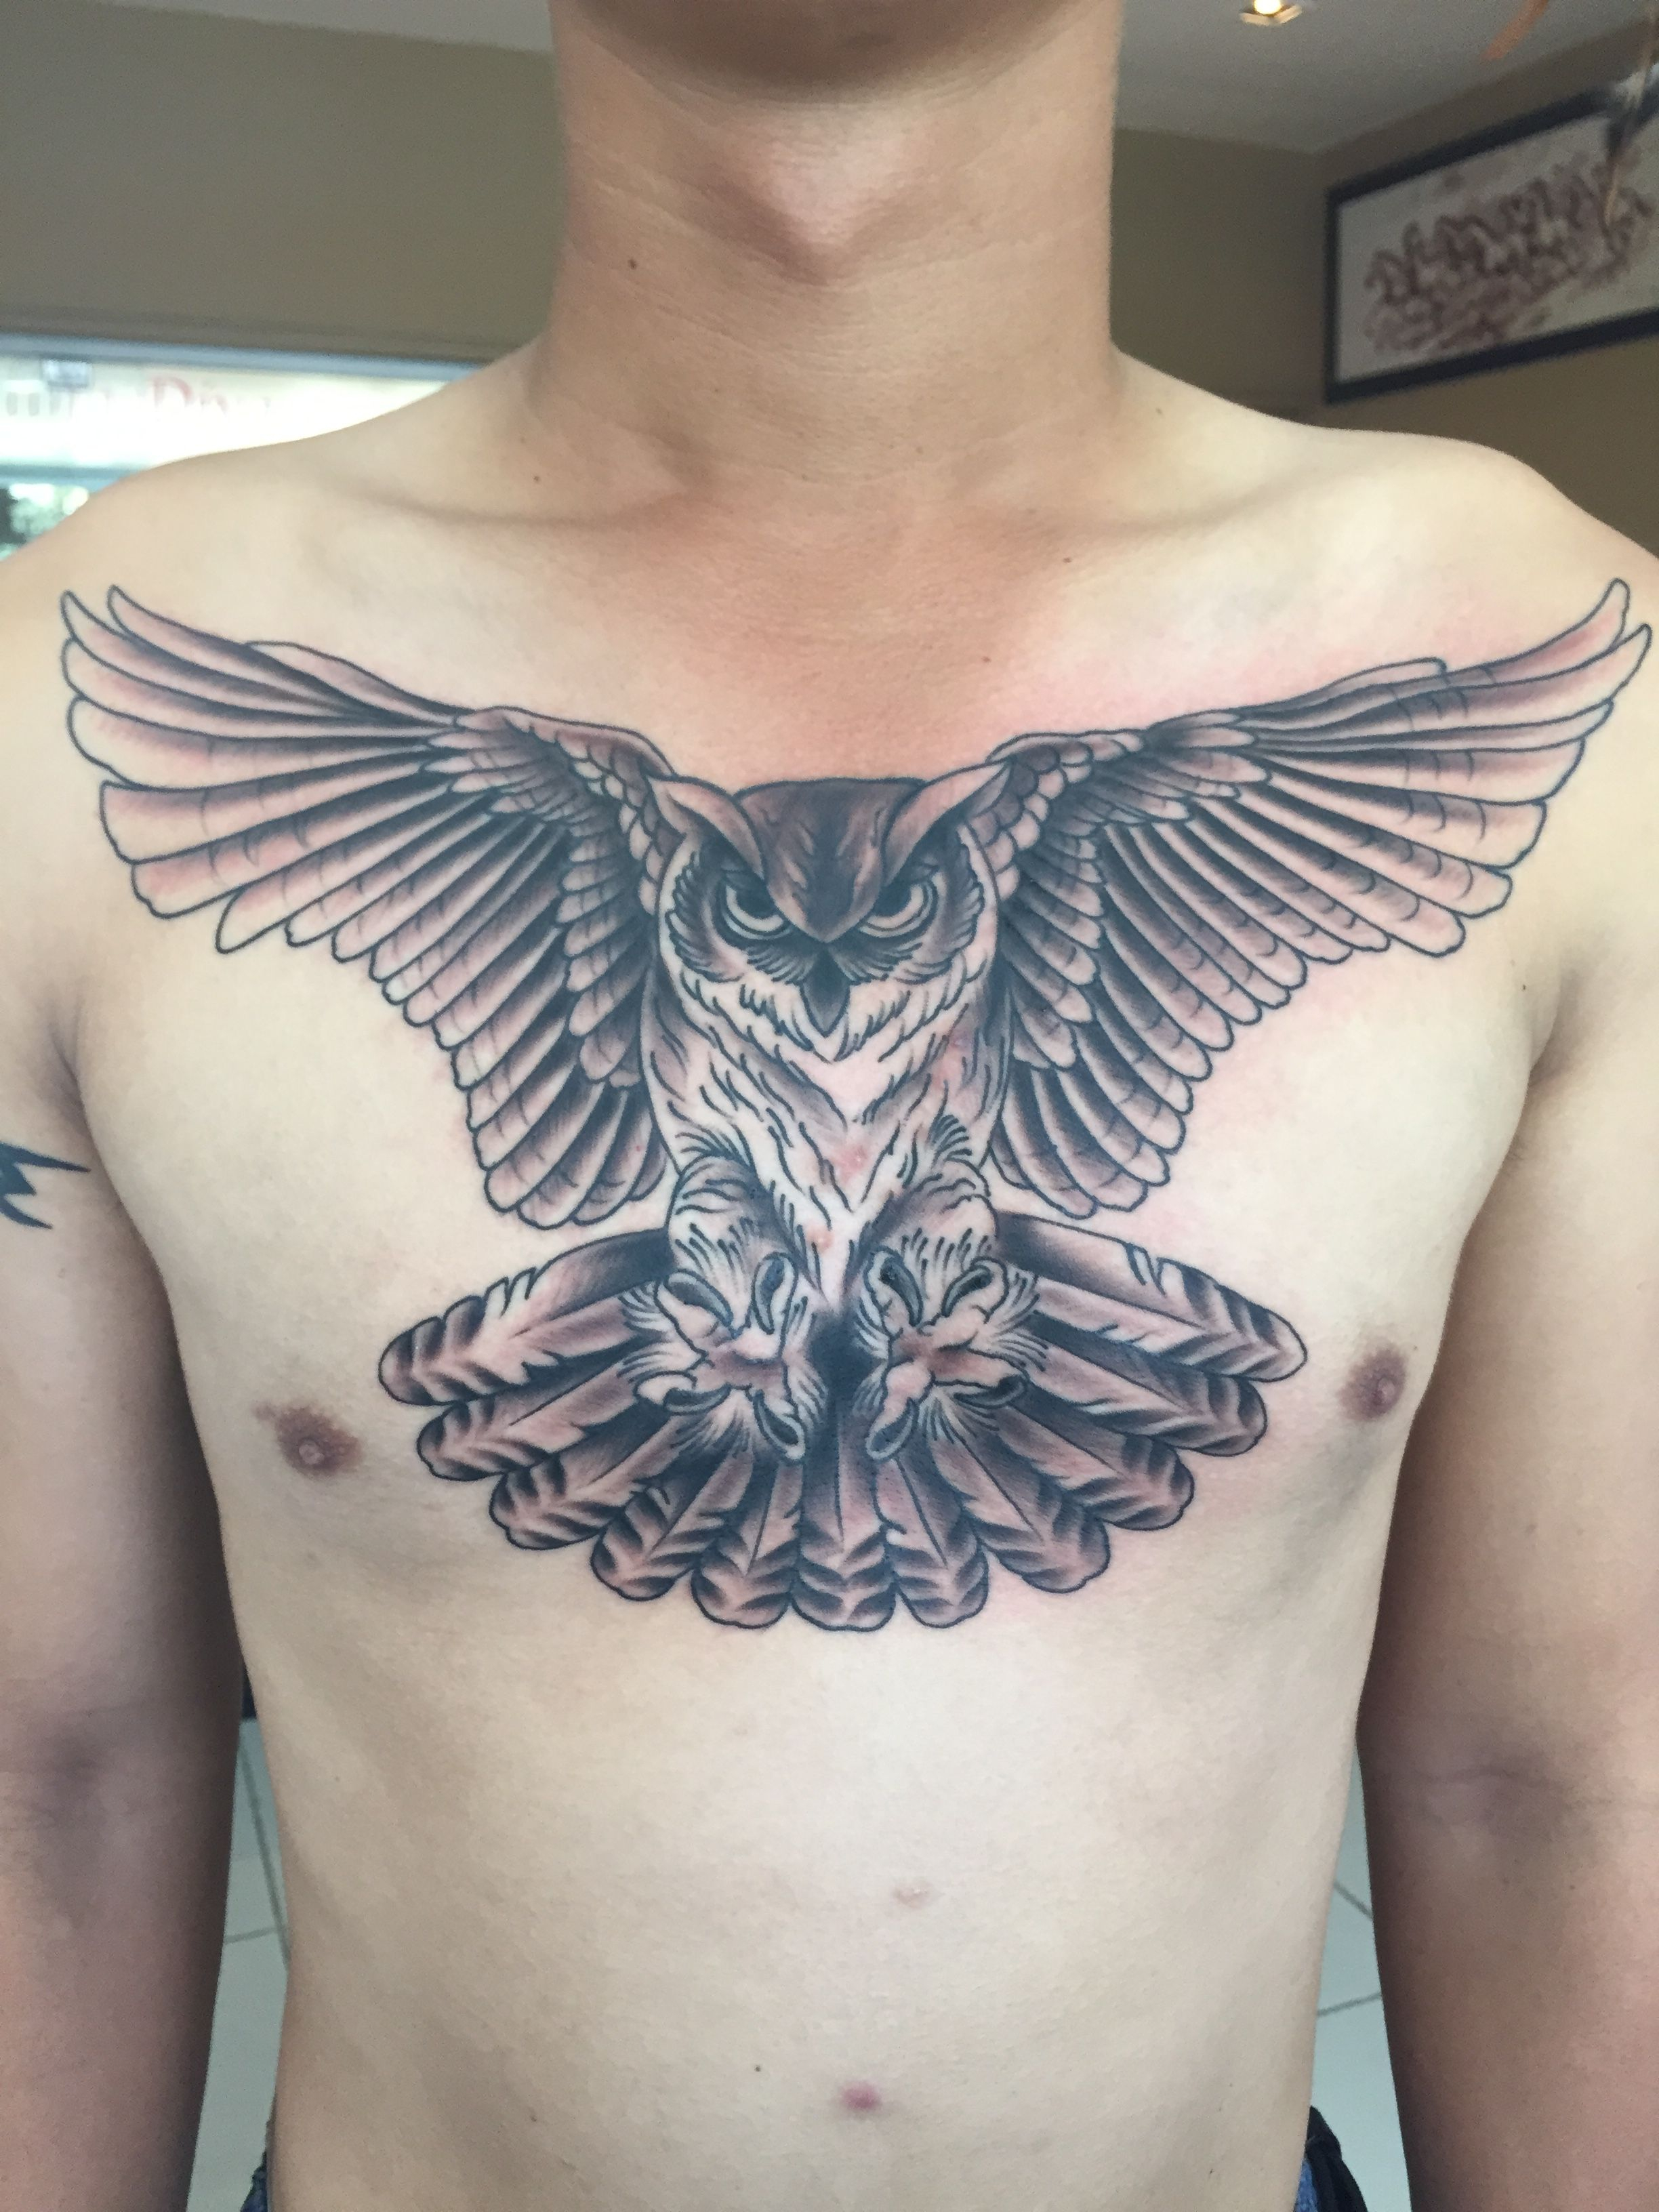 Full Chest Piece Black And Grey Owl Tattoofor Further Inquiries in size 2448 X 3264